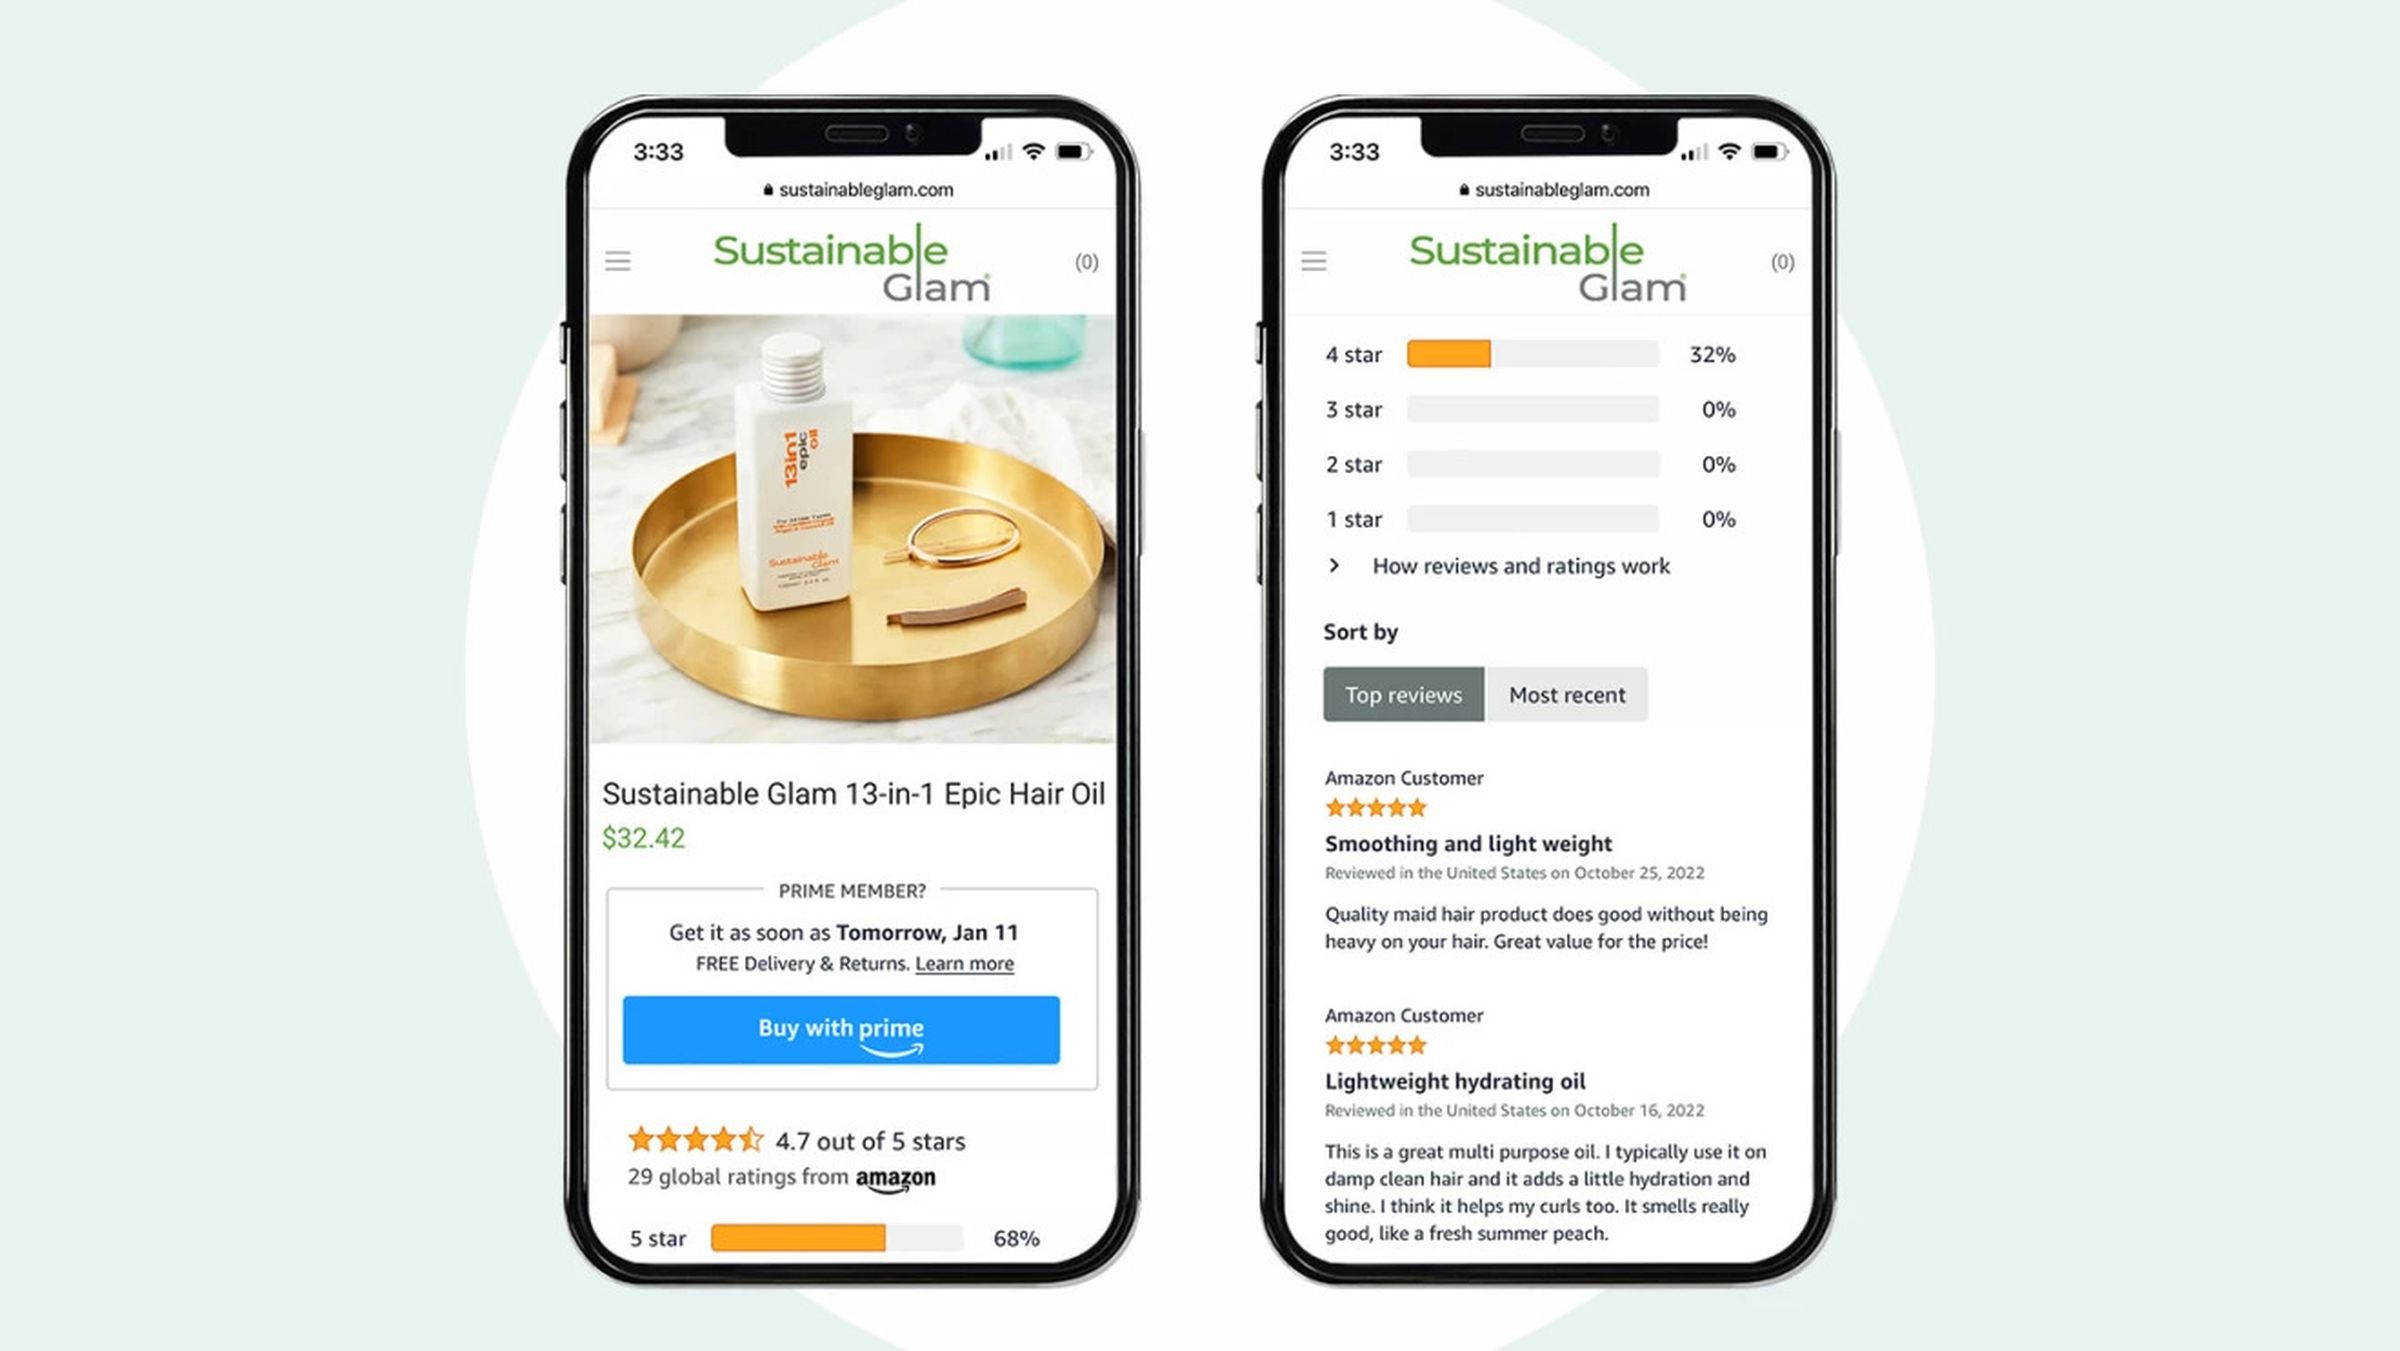 Merchants can also put ratings and reviews from Amazon on their own websites.